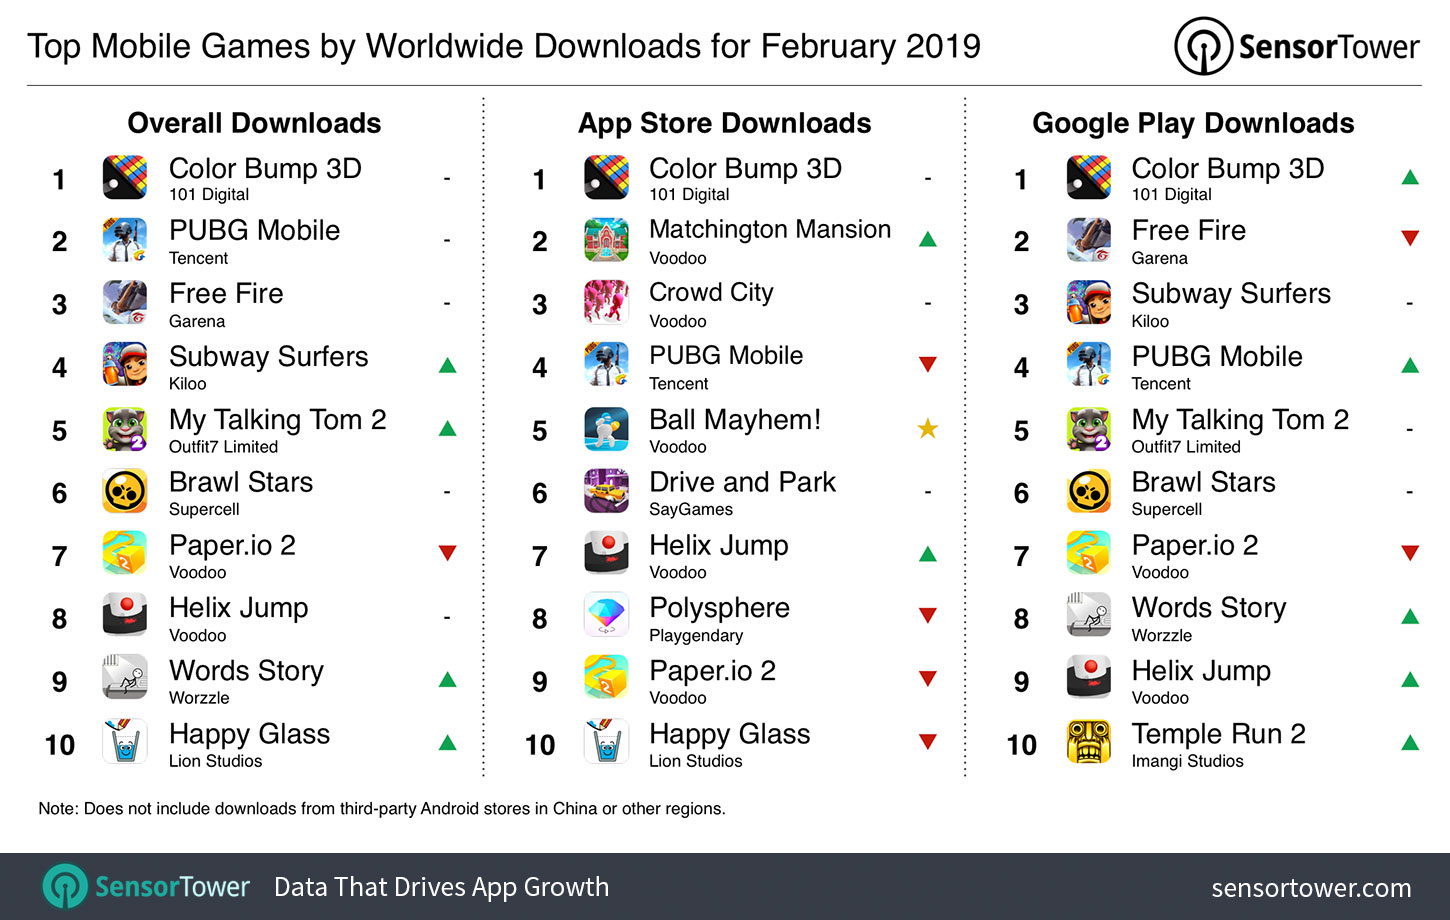 Top Mobile Games by Downloads for February 2019